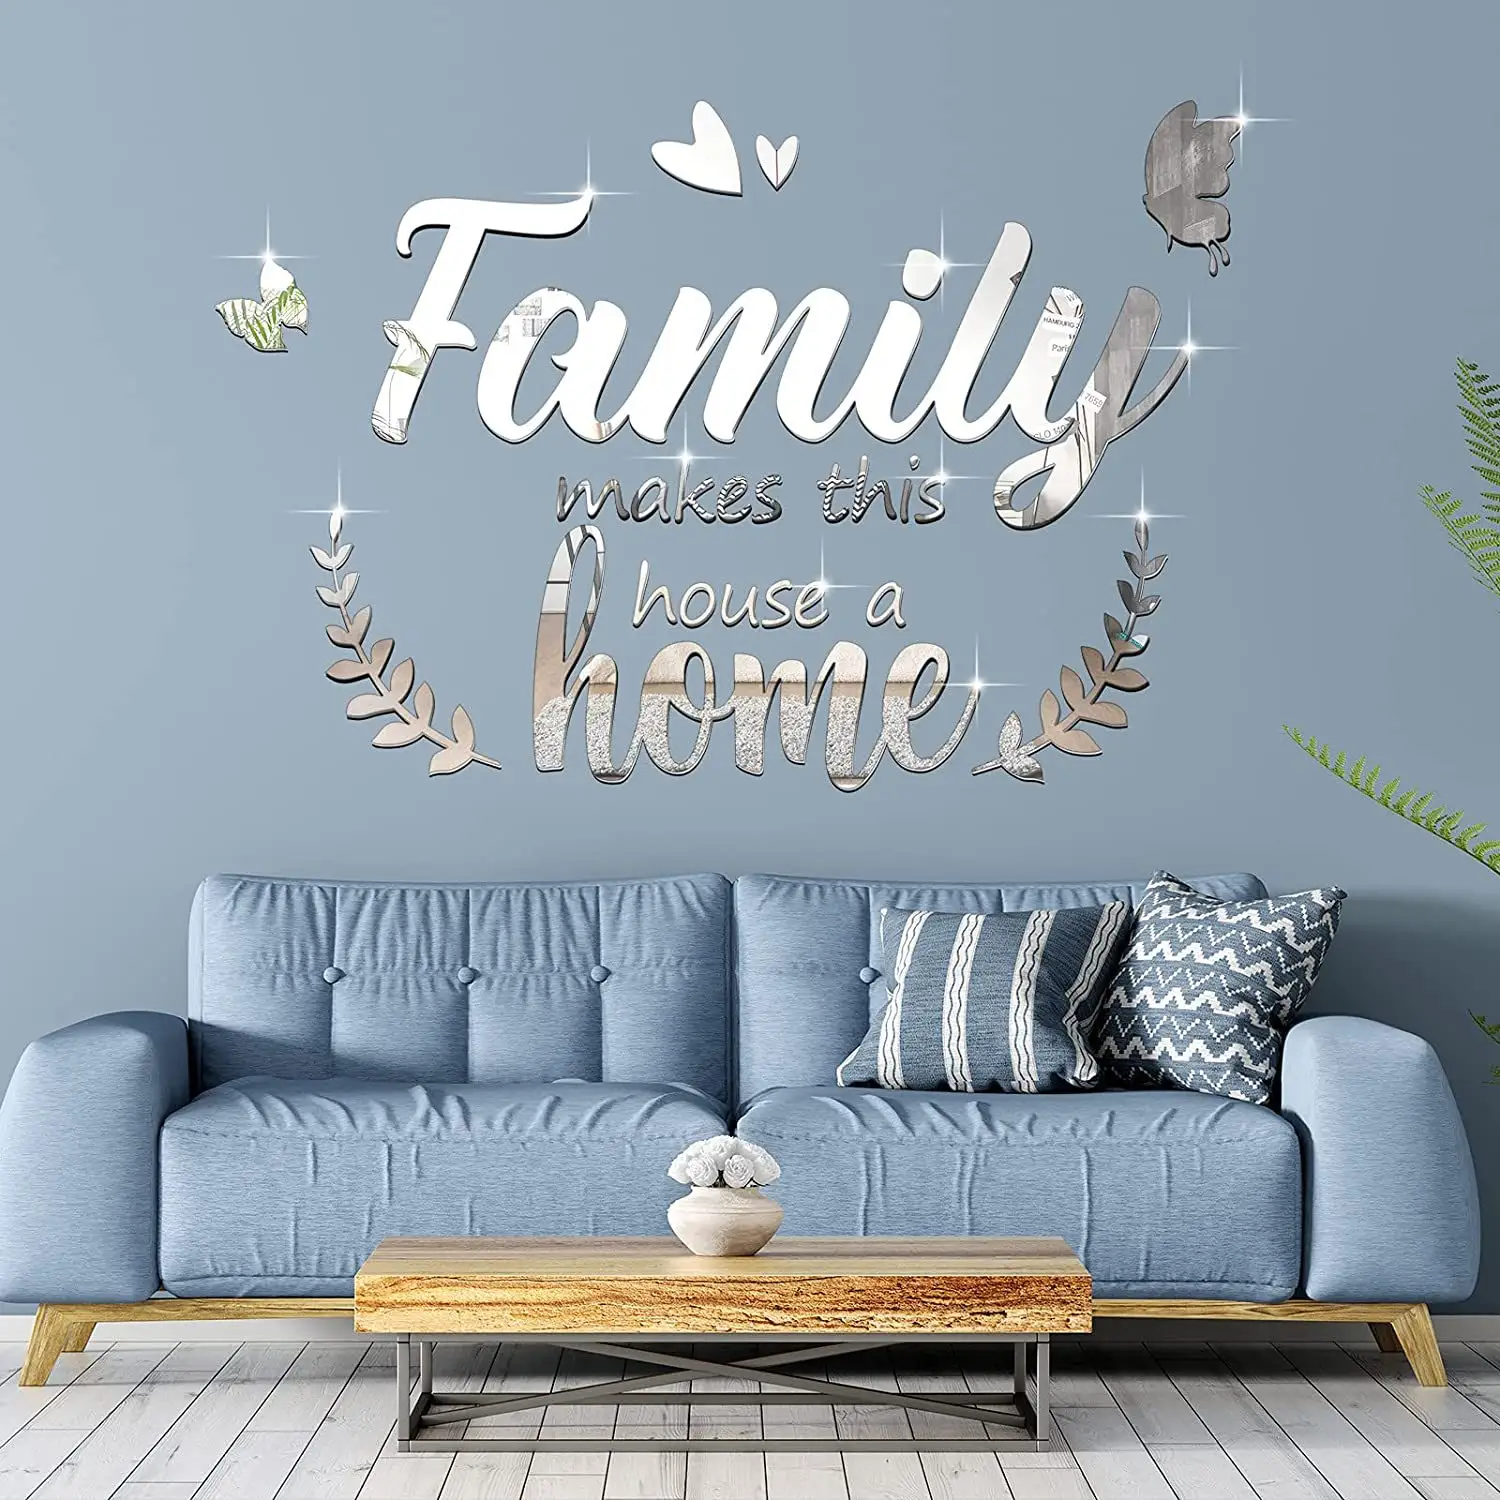 3D Acrylic Mirror Decal Wall Decor Stickers Family Letter Quotes Wall Stickers Removable DIY Family Butterfly Mirror Sticker